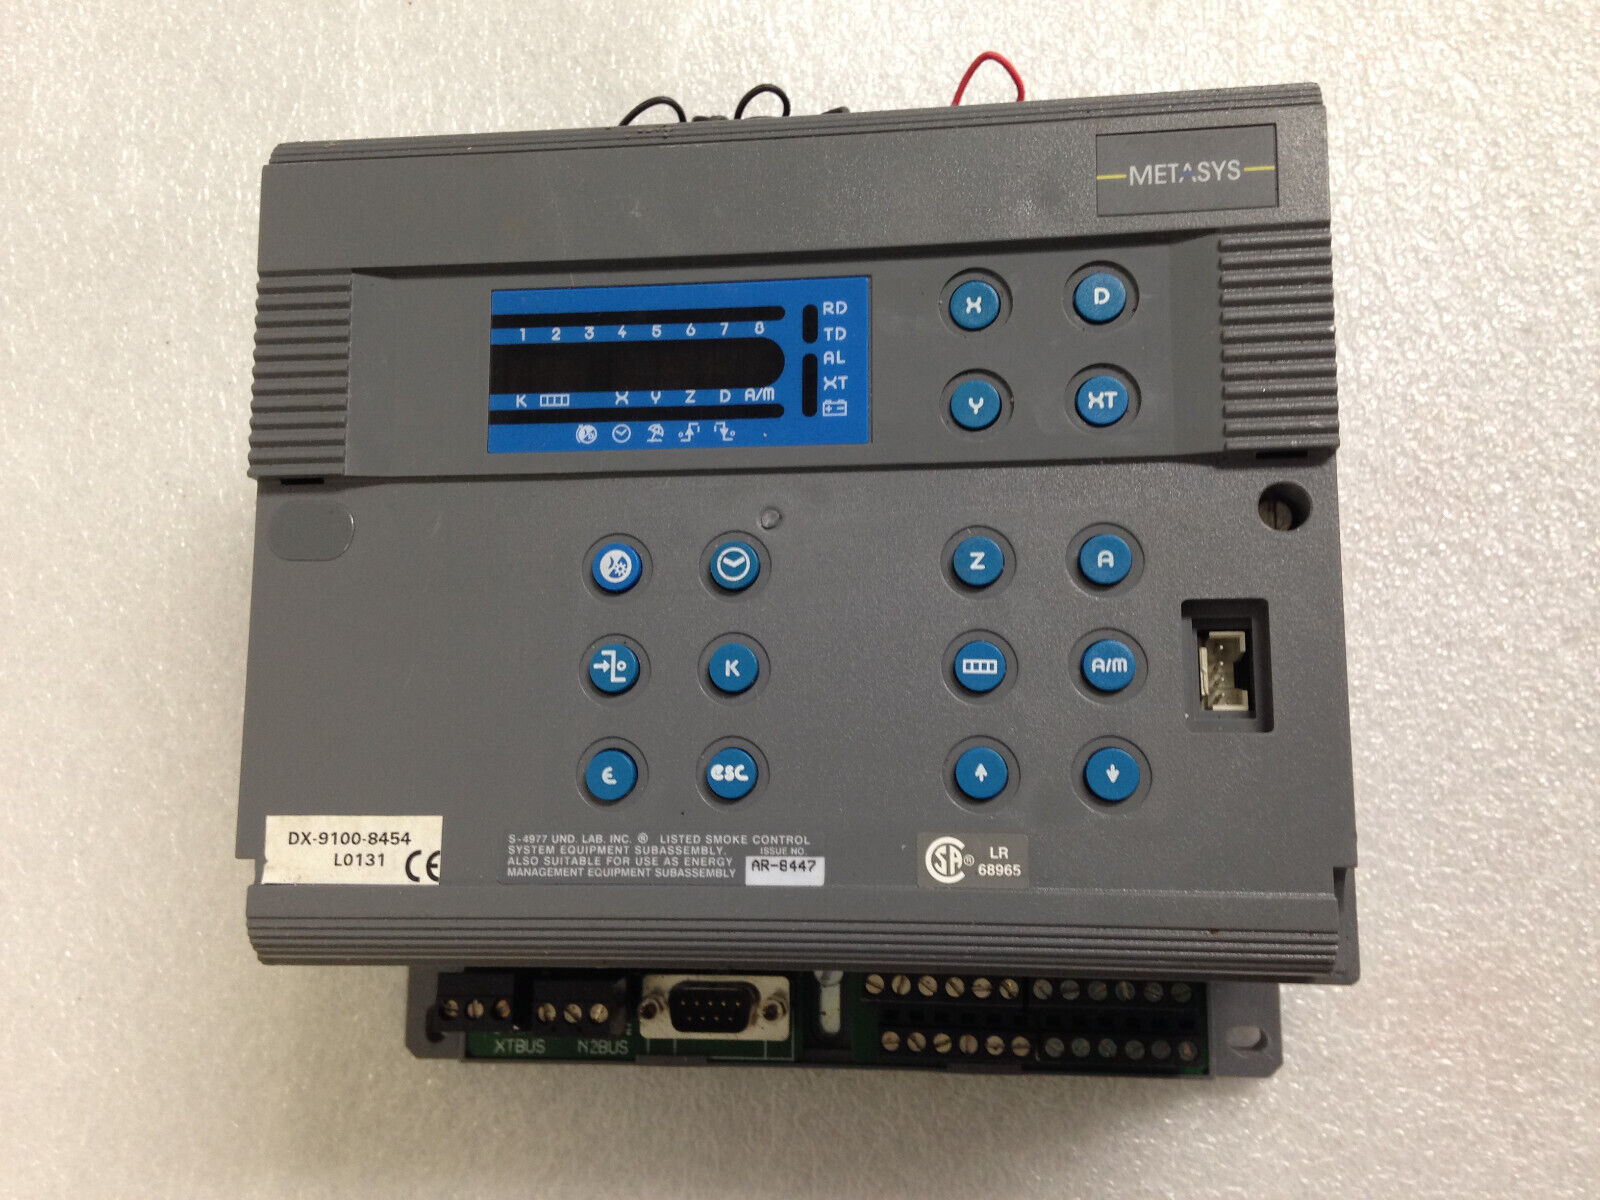 DX-9100-8454 Johnson Controls Metasys Controller  Used